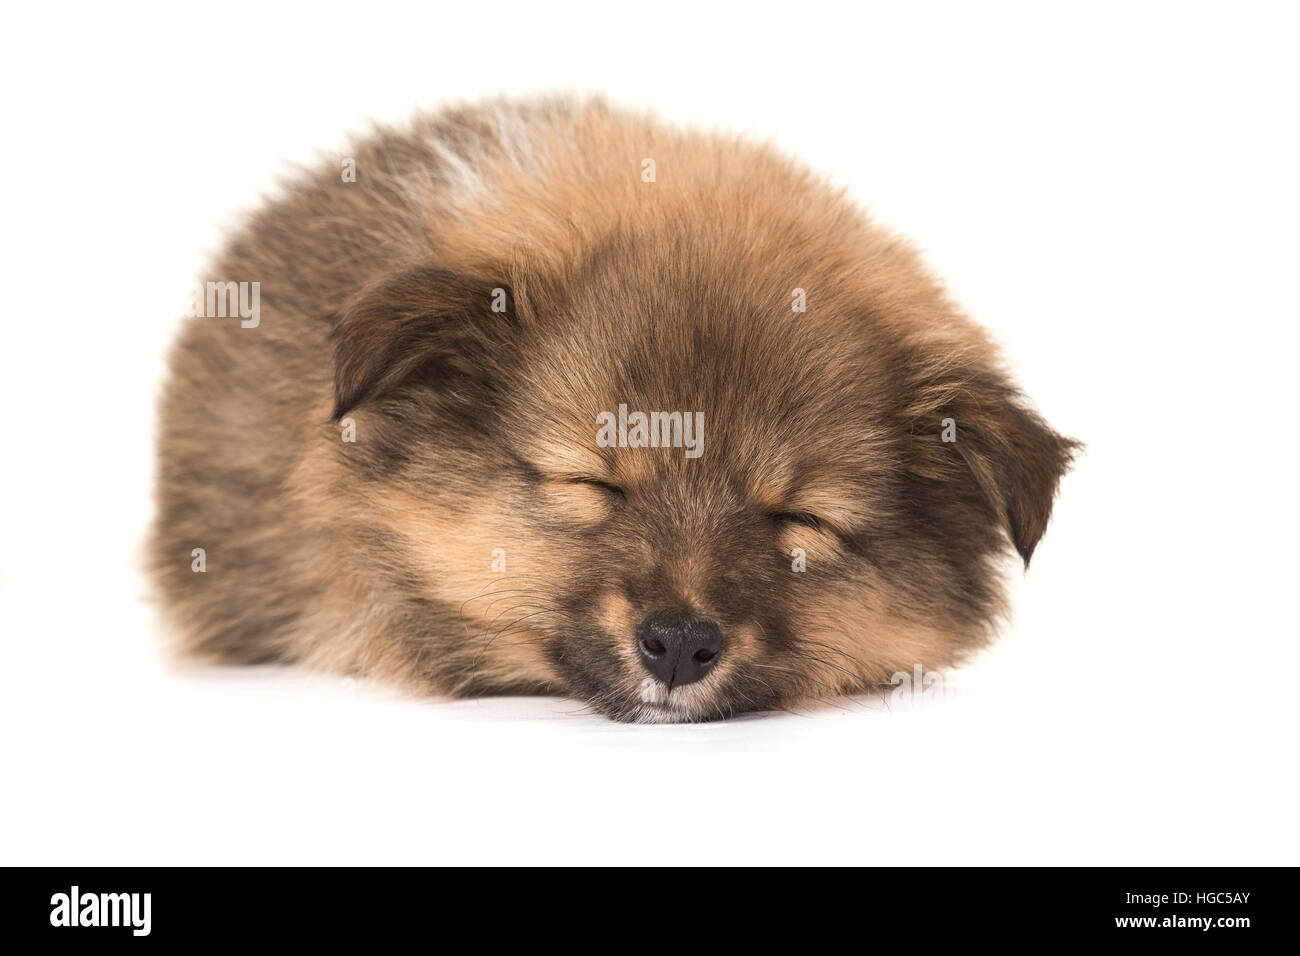 Sleeping shetlands sheepdog sheltie puppy with eyes closed seen from the front isolated on a white background Stock Photo